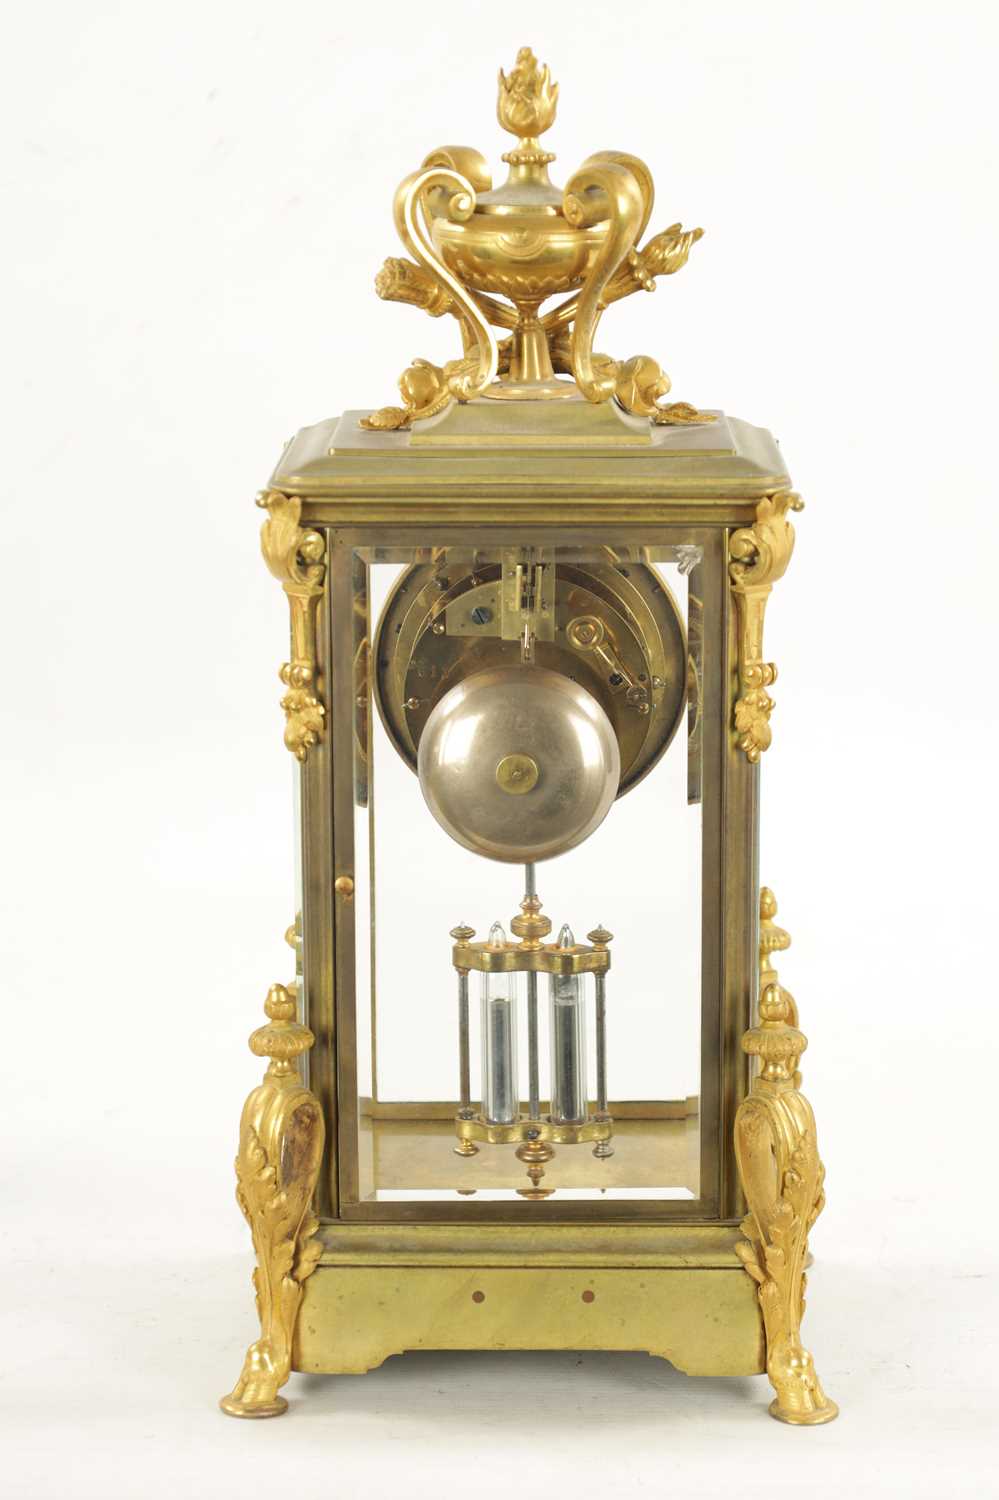 A LATE 19TH CENTURY FRENCH GILT BRASS FOUR-GLASS MANTEL CLOCK - Image 7 of 10